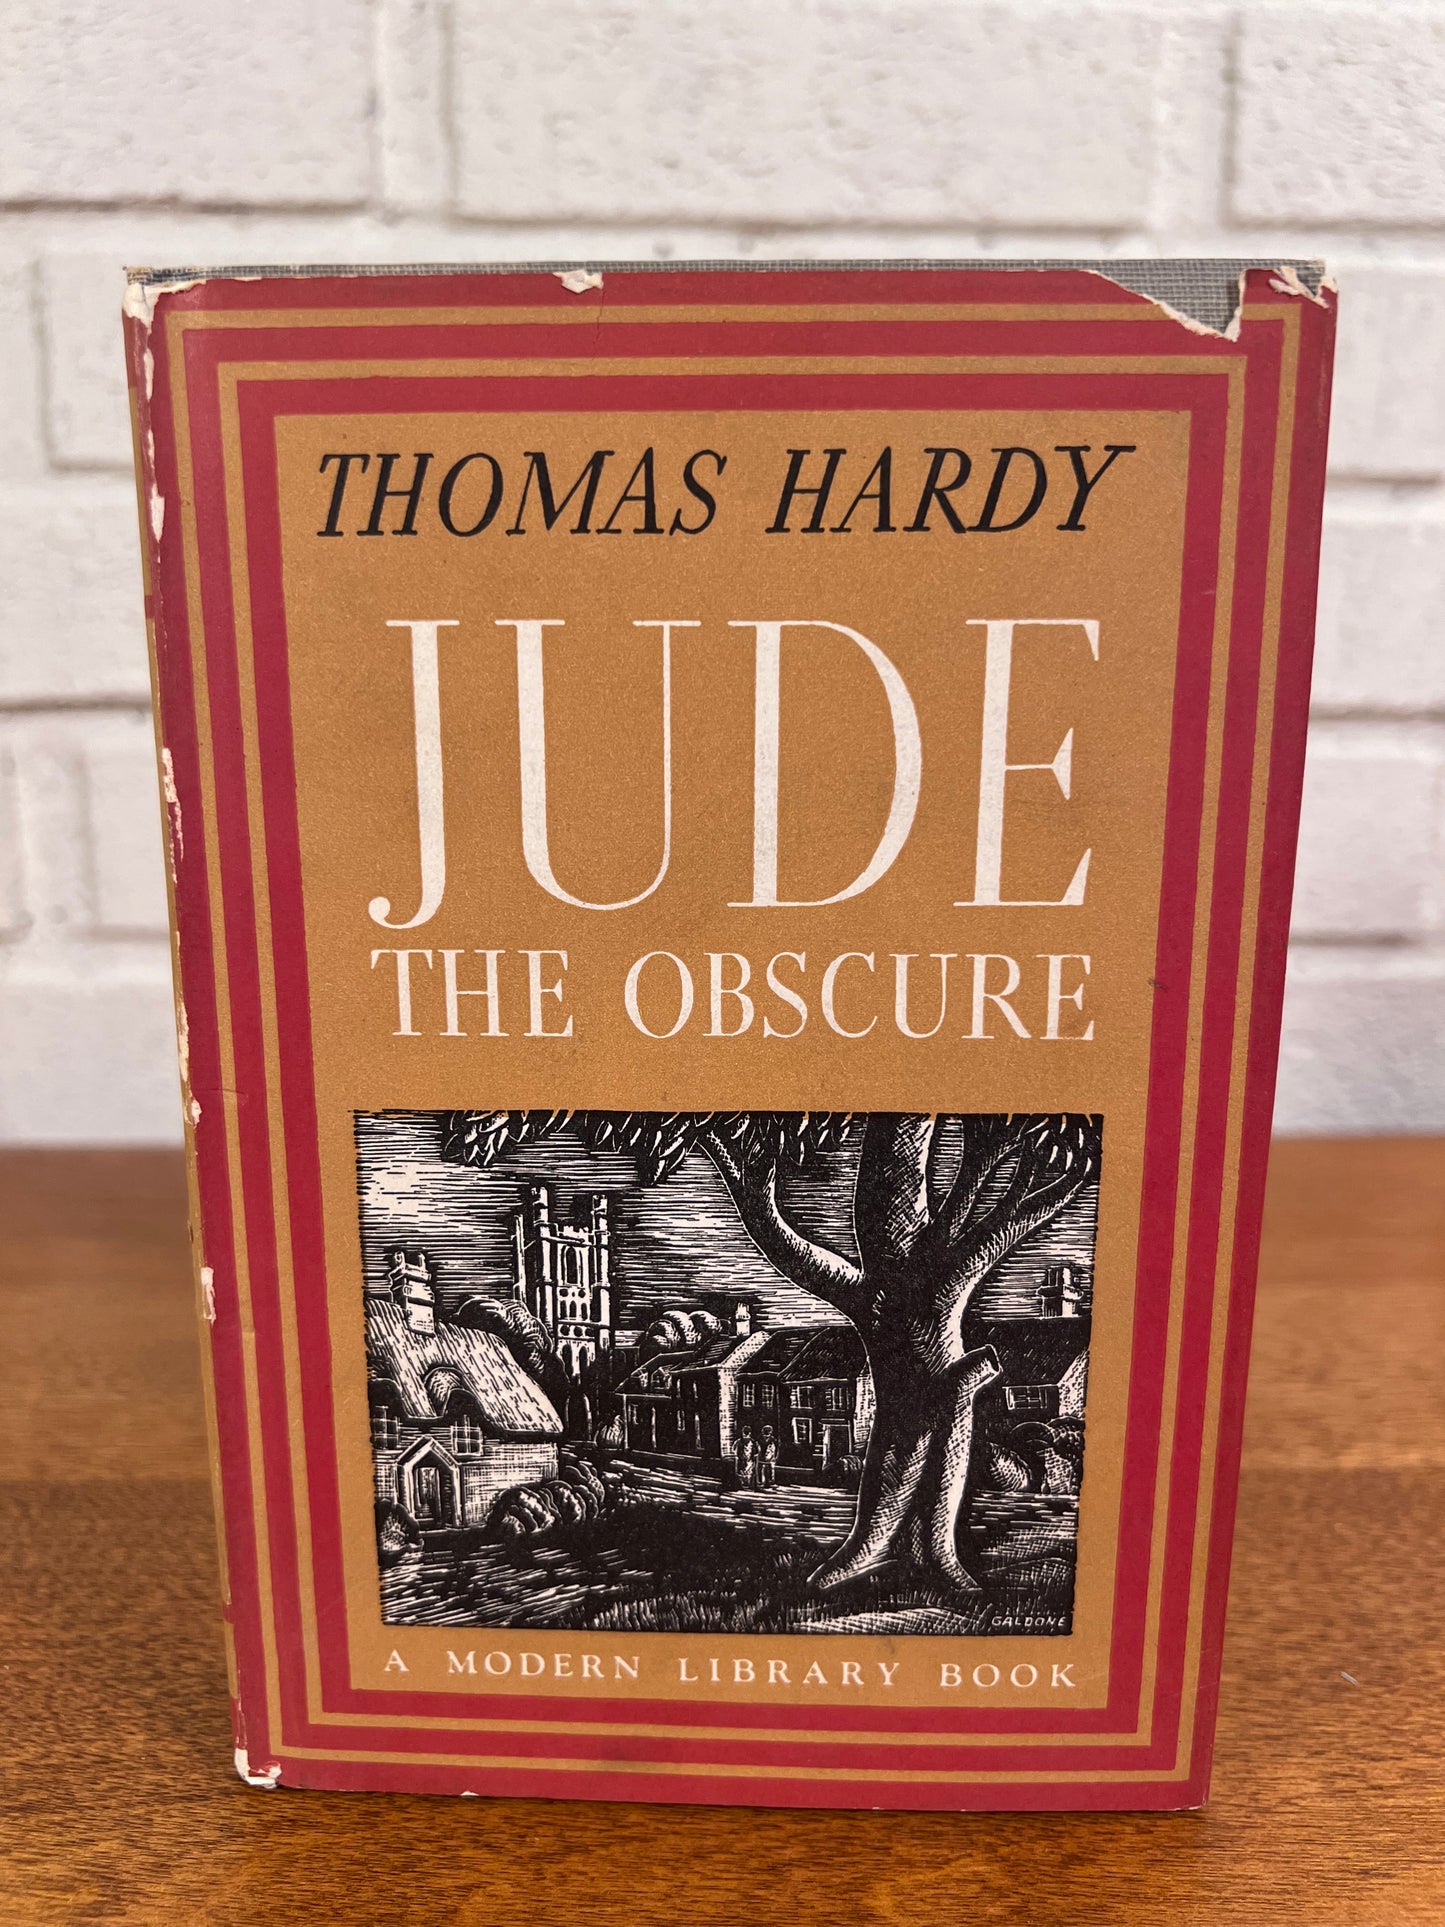 Jude the Obsure by Thomas Hardy